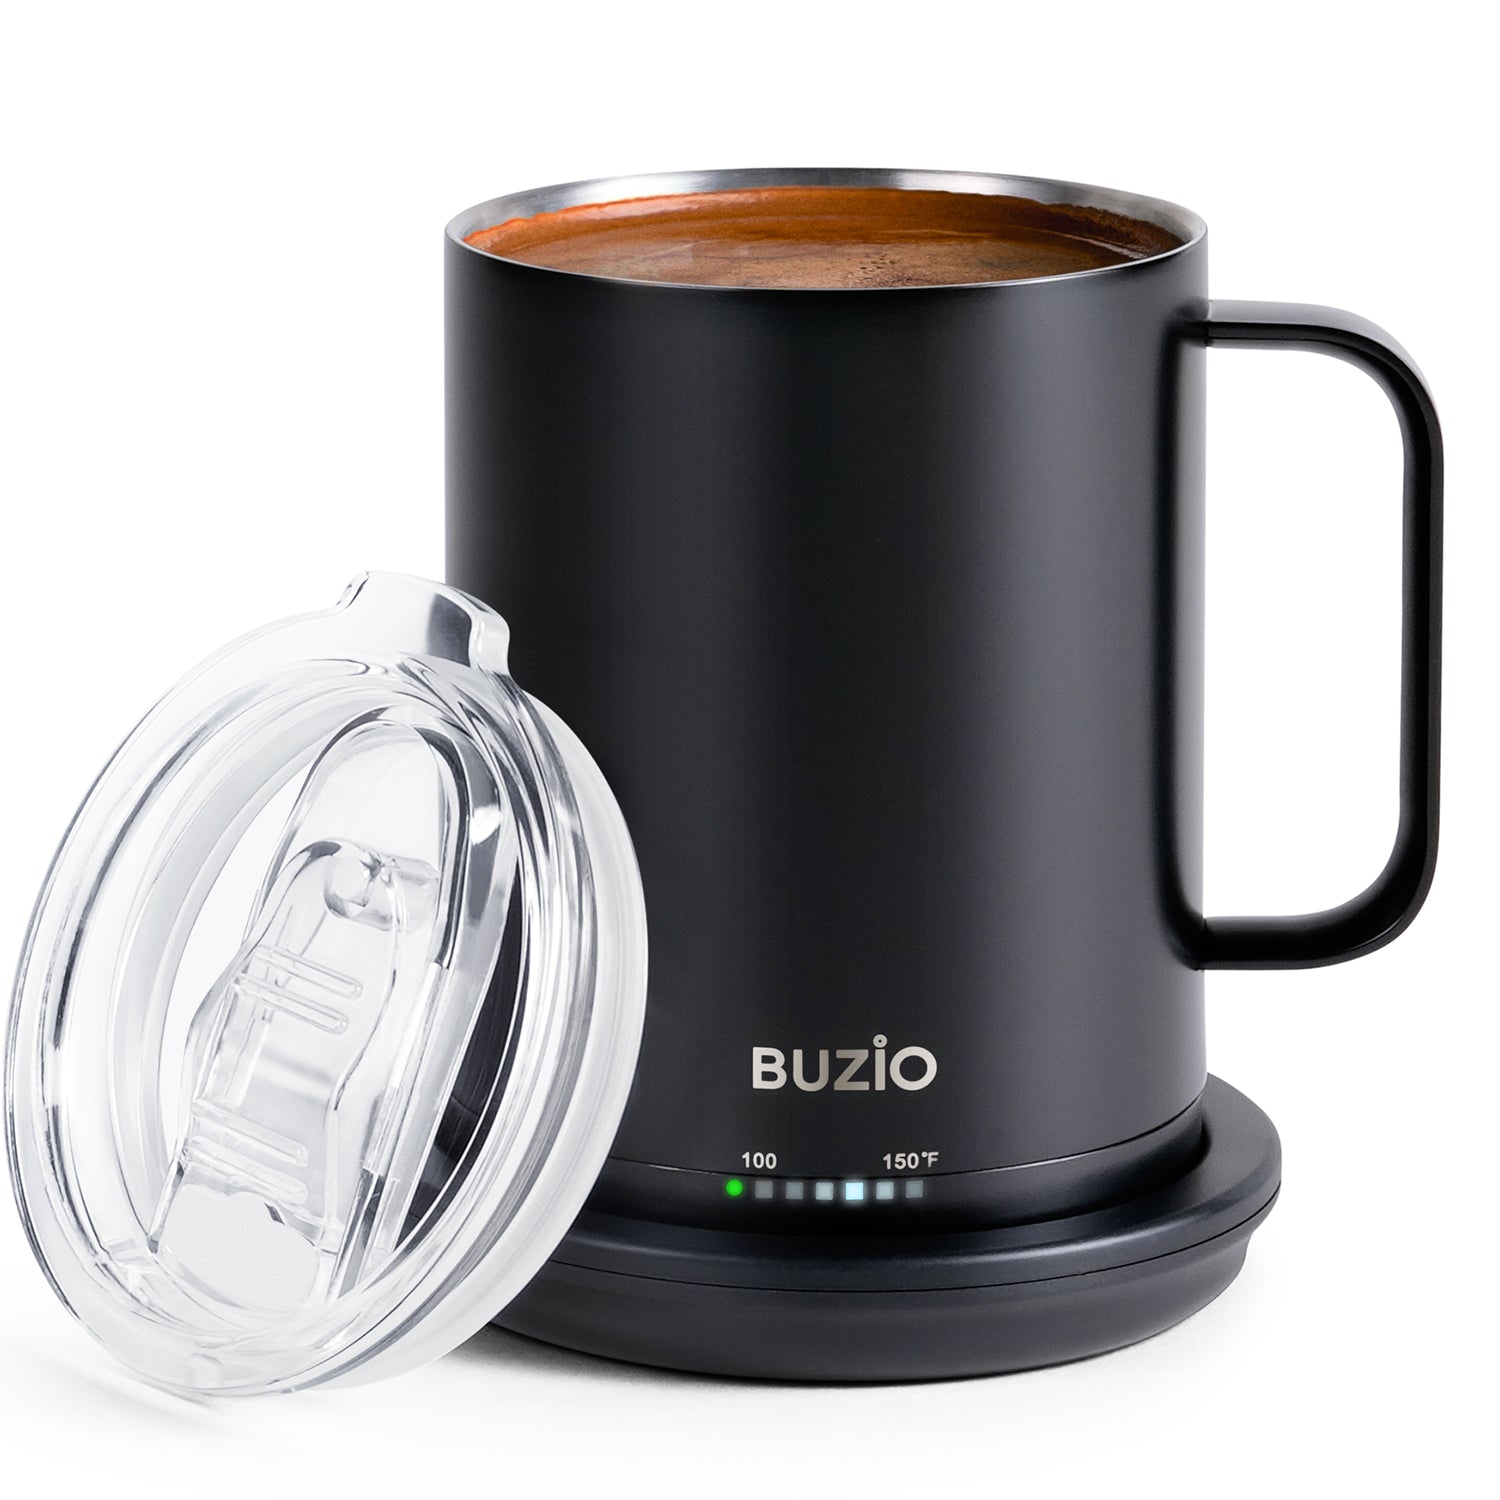 Electric Smart Mug Warmer Will Ensure That Your Beverage Is At The